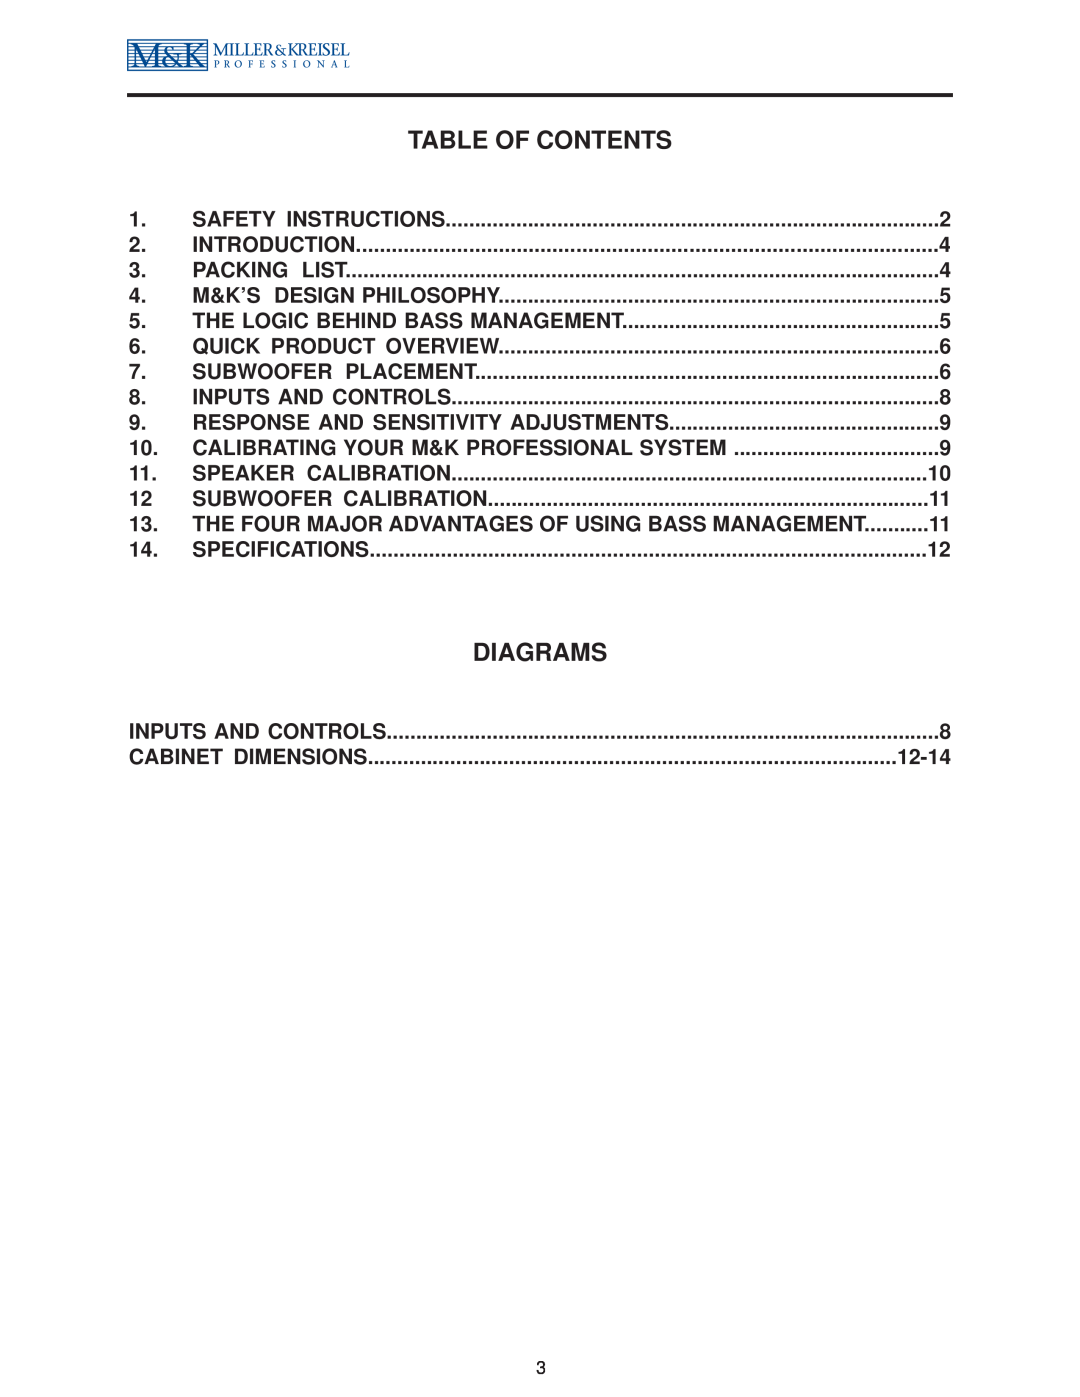 MK Sound MPS-2810 operation manual Table Of Contents, Diagrams 